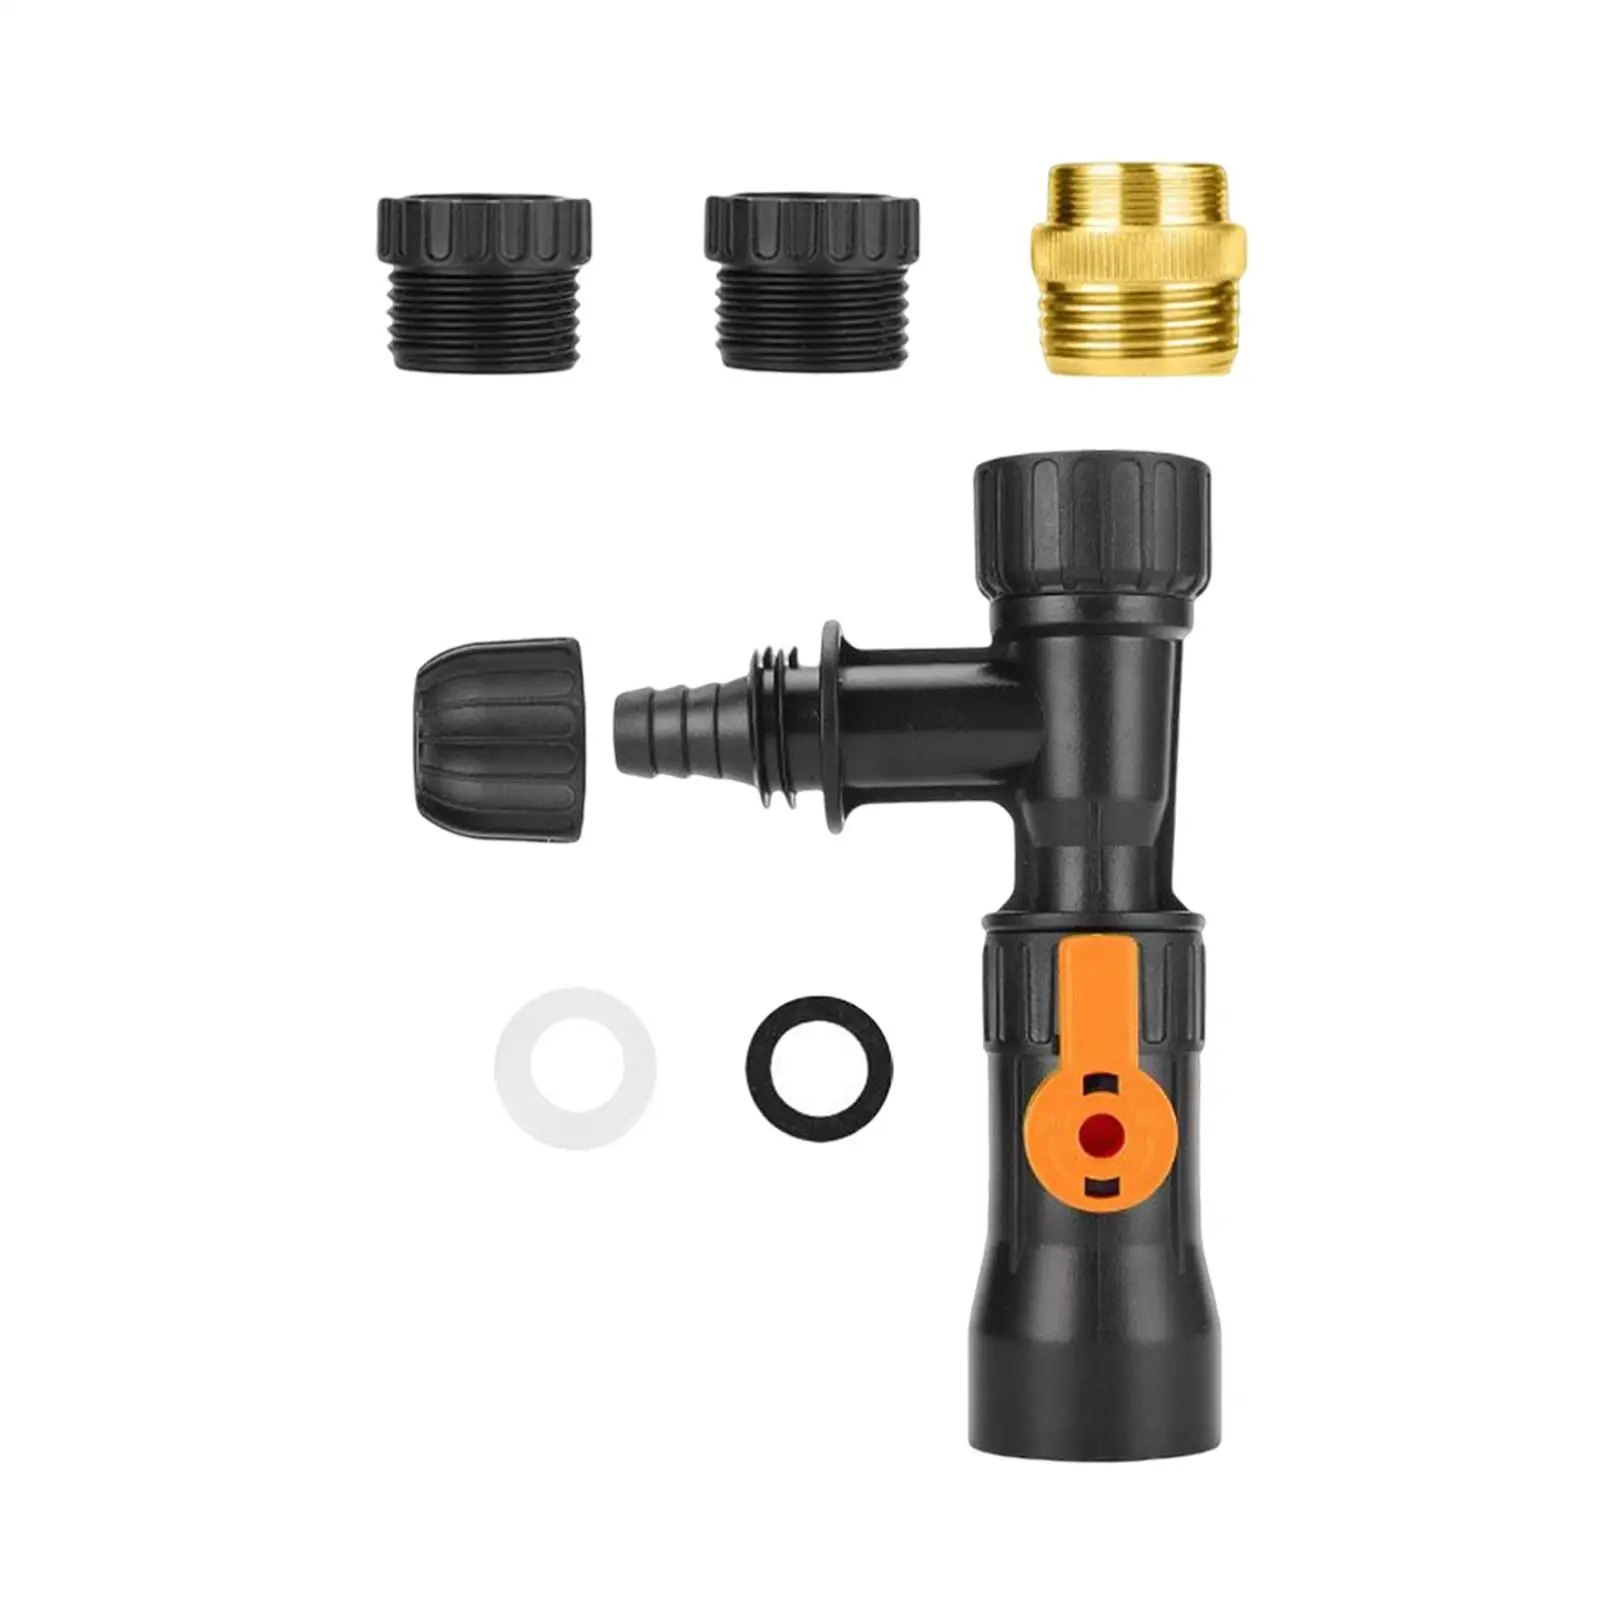 Water Changer Kit with 4 Faucet Adapter Fittings Fish Tank Cleaning